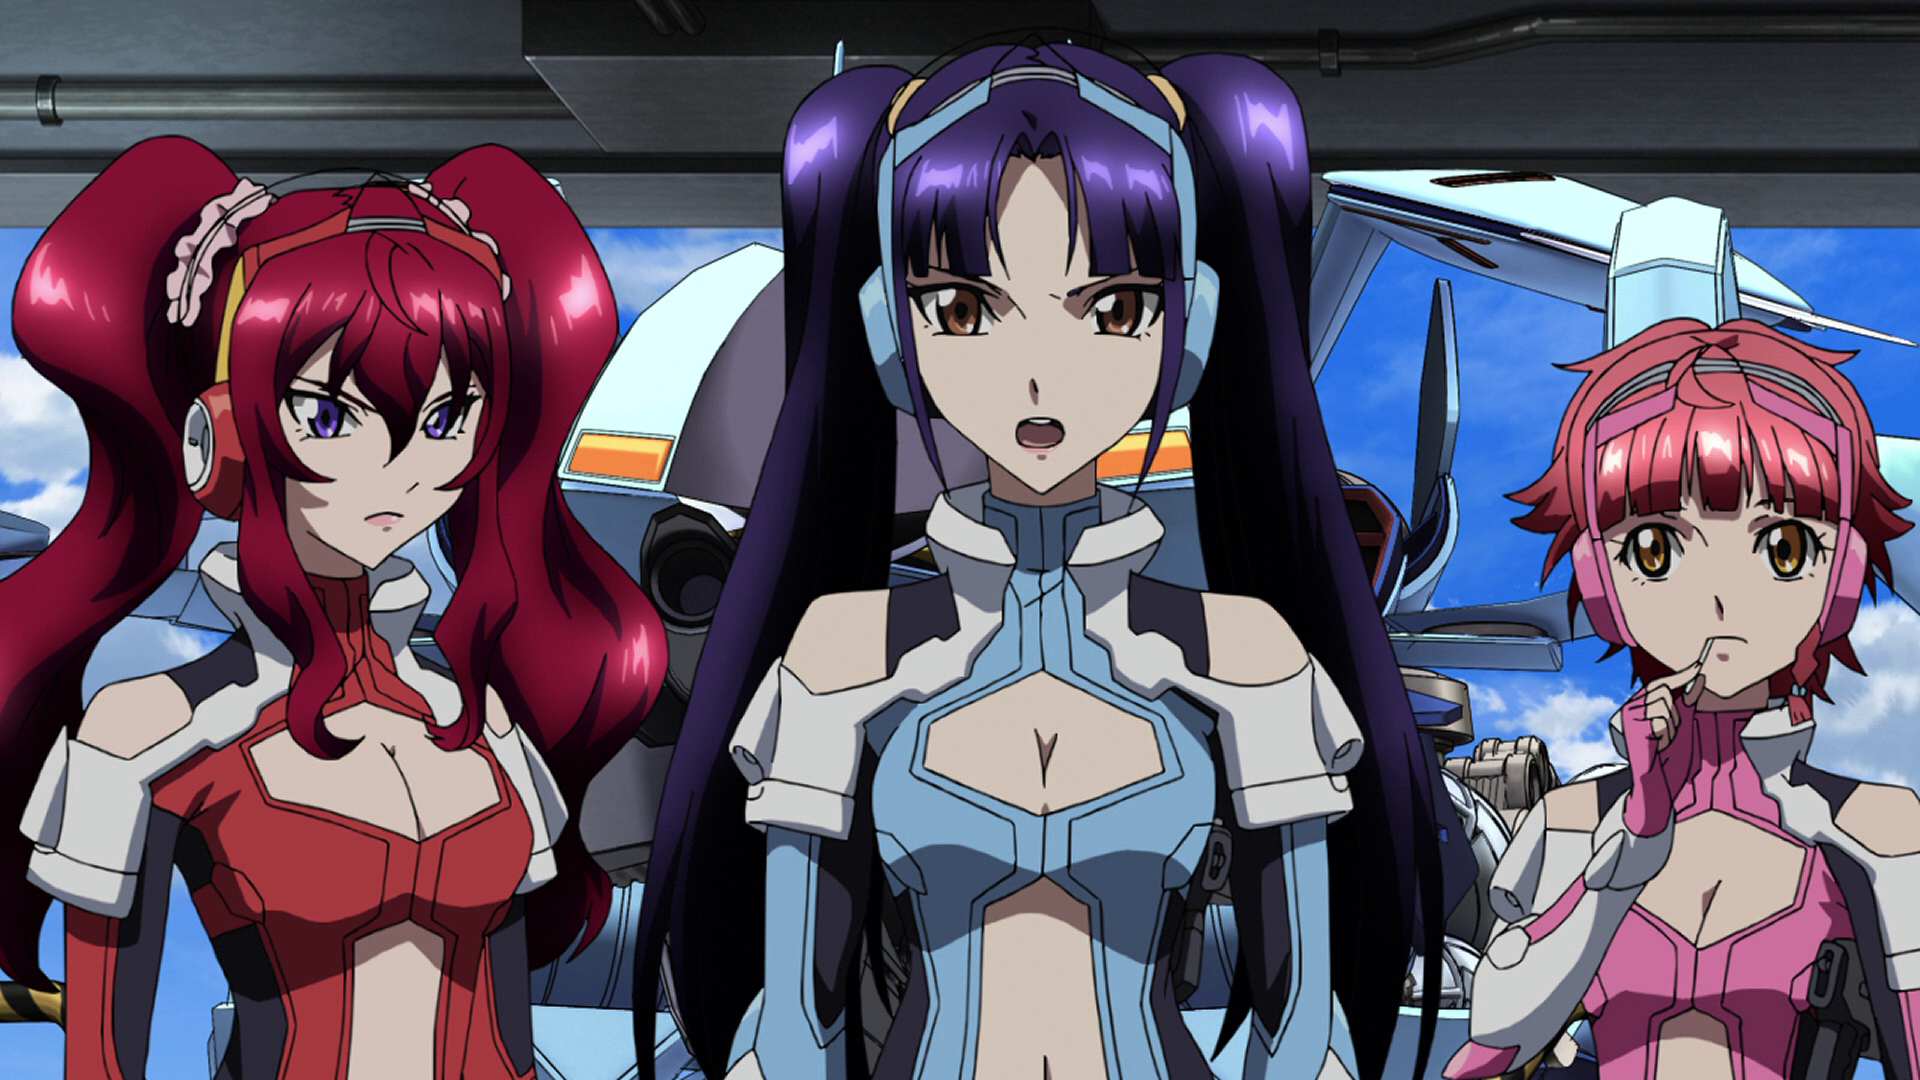 Animax Asia TV on X: CROSS ANGE Rondo of Angel and Dragon ends